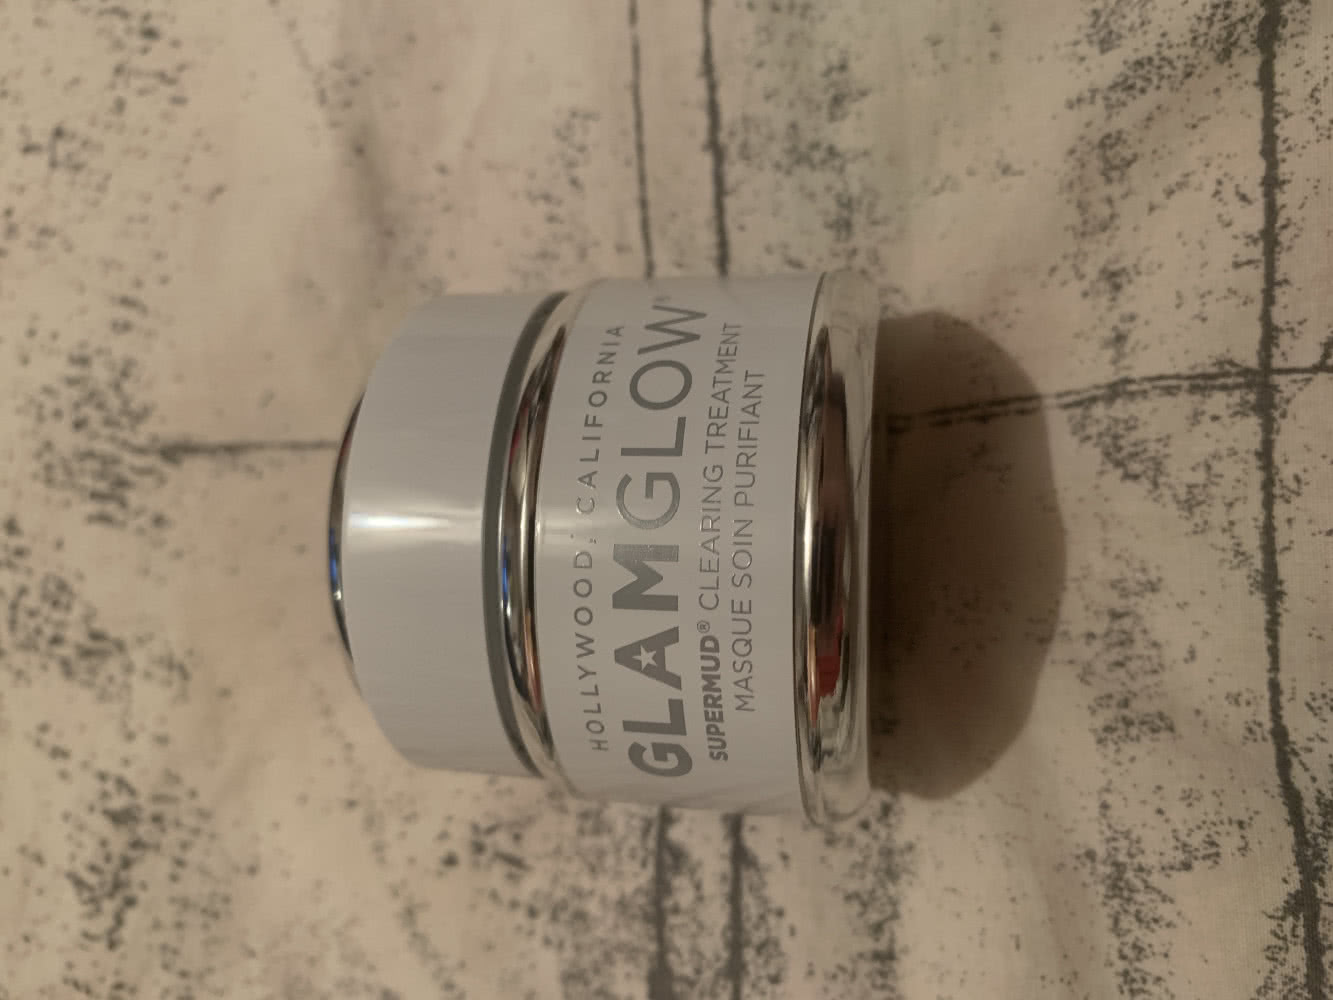 Glamglow, Supermud Clearing Treatment, 50g